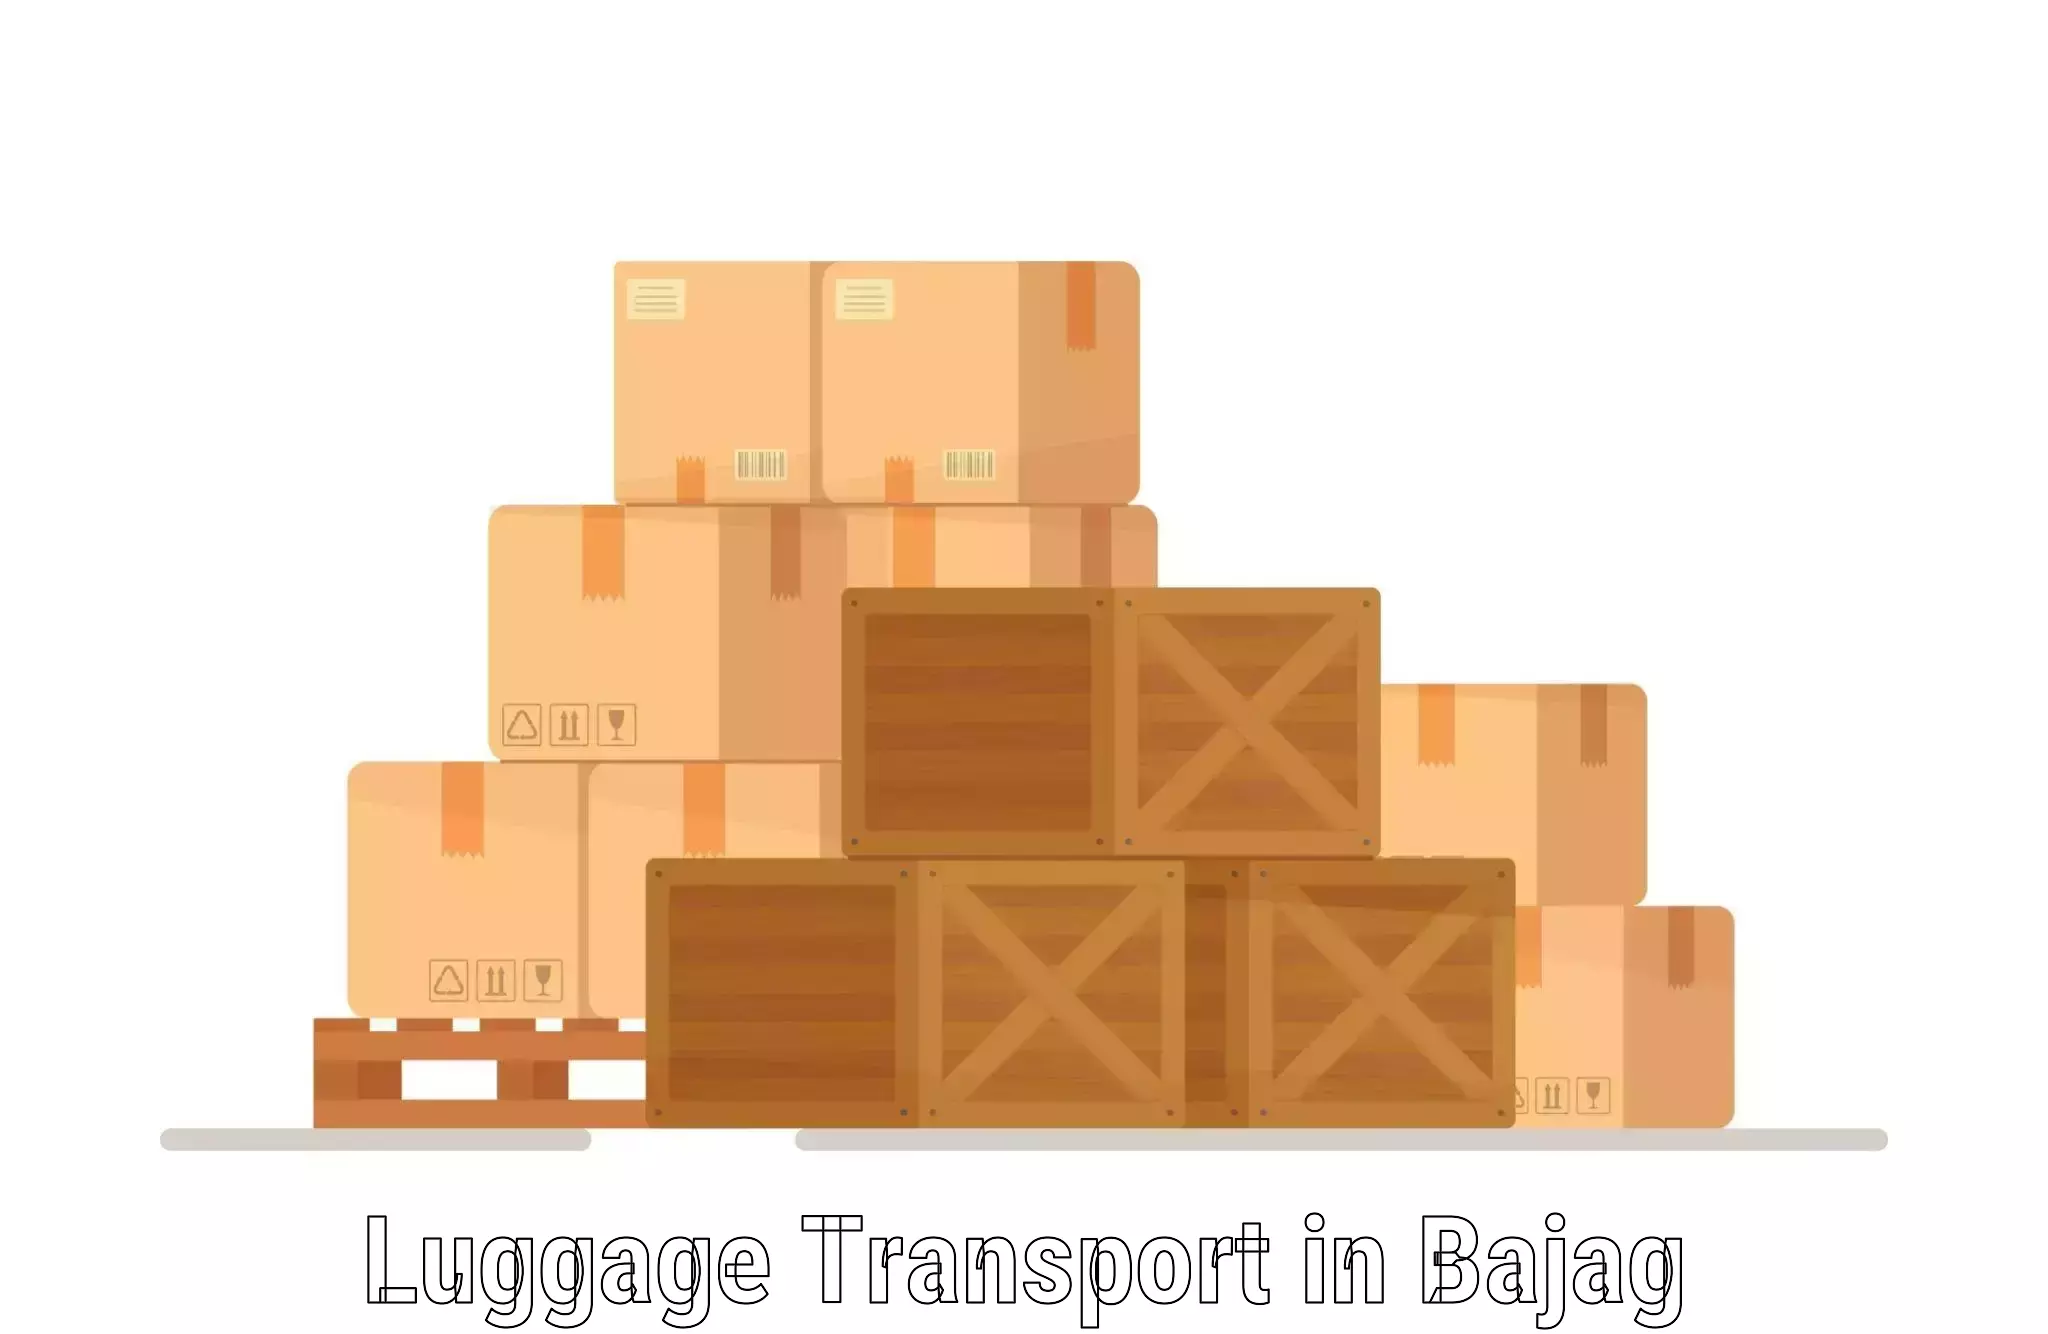 Simplified luggage transport in Bajag